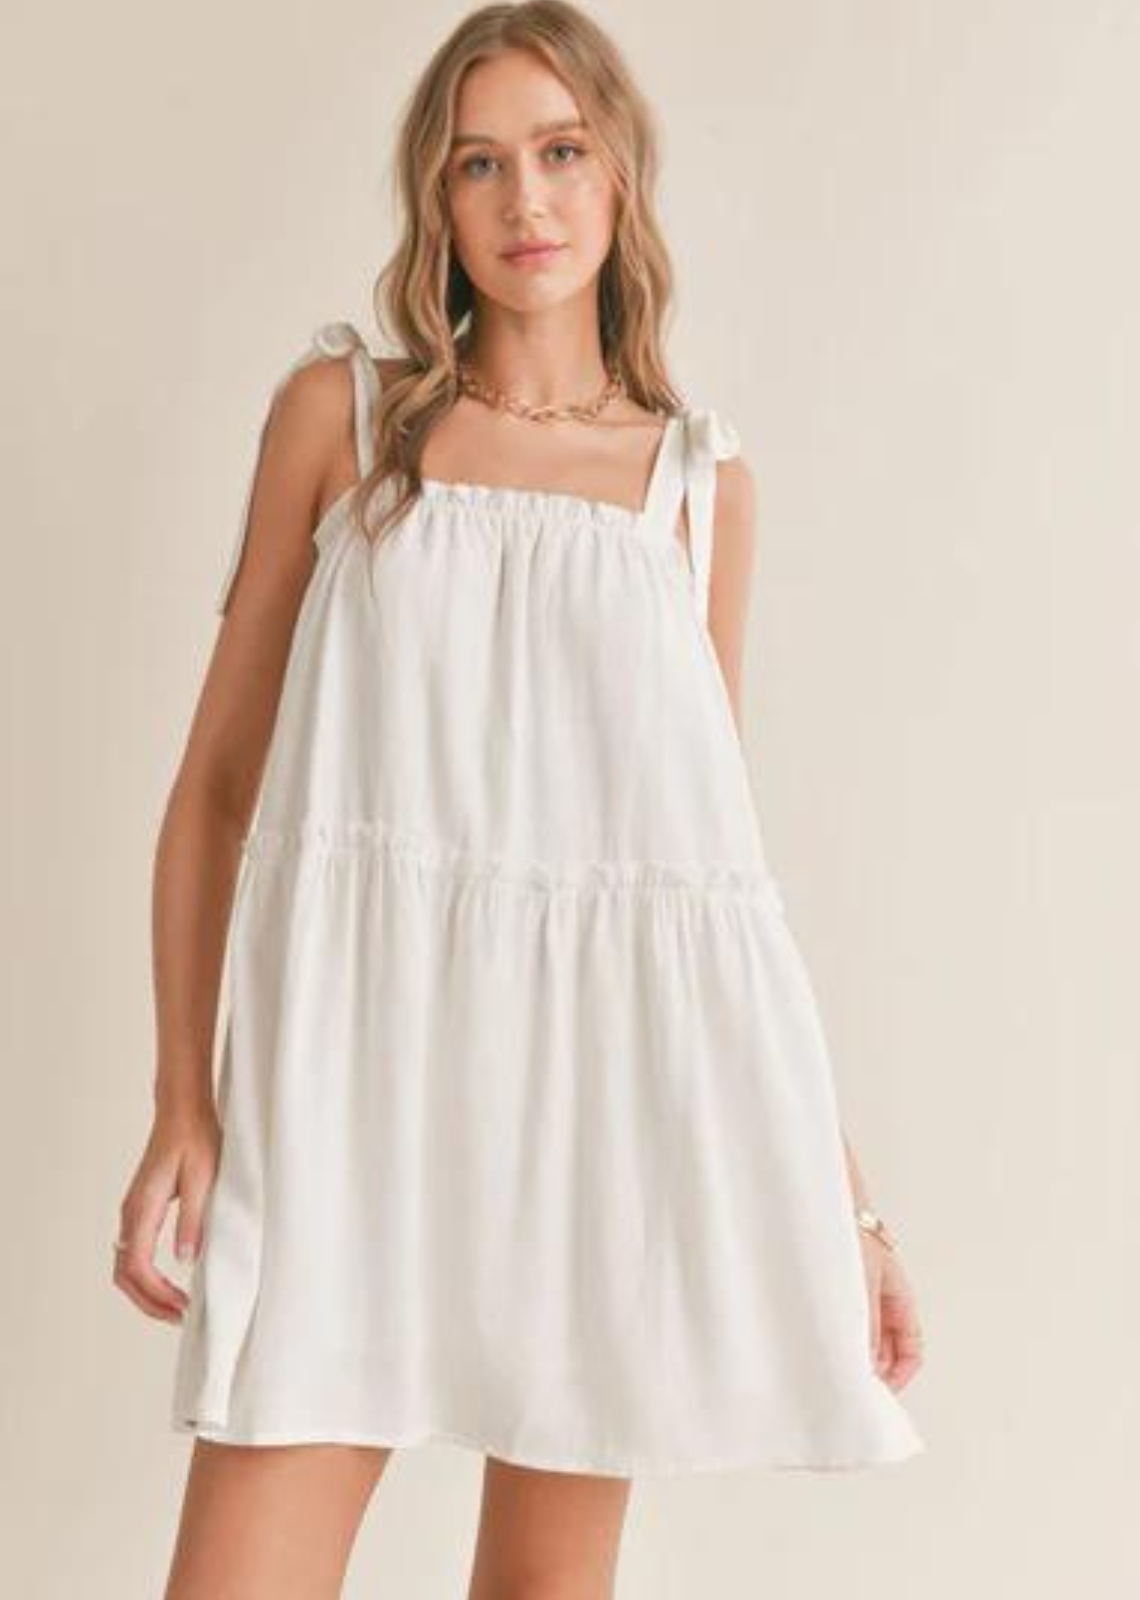 Sadie & Sage Sugarloaf Tiered Dress. Feel effortlessly stylish in our Sugarloaf Tiered Dress with Tie Straps! The tiered design and tie straps add a playful touch to this comfortable and versatile dress. Perfect for any occasion, this dress is a must-have for your wardrobe.